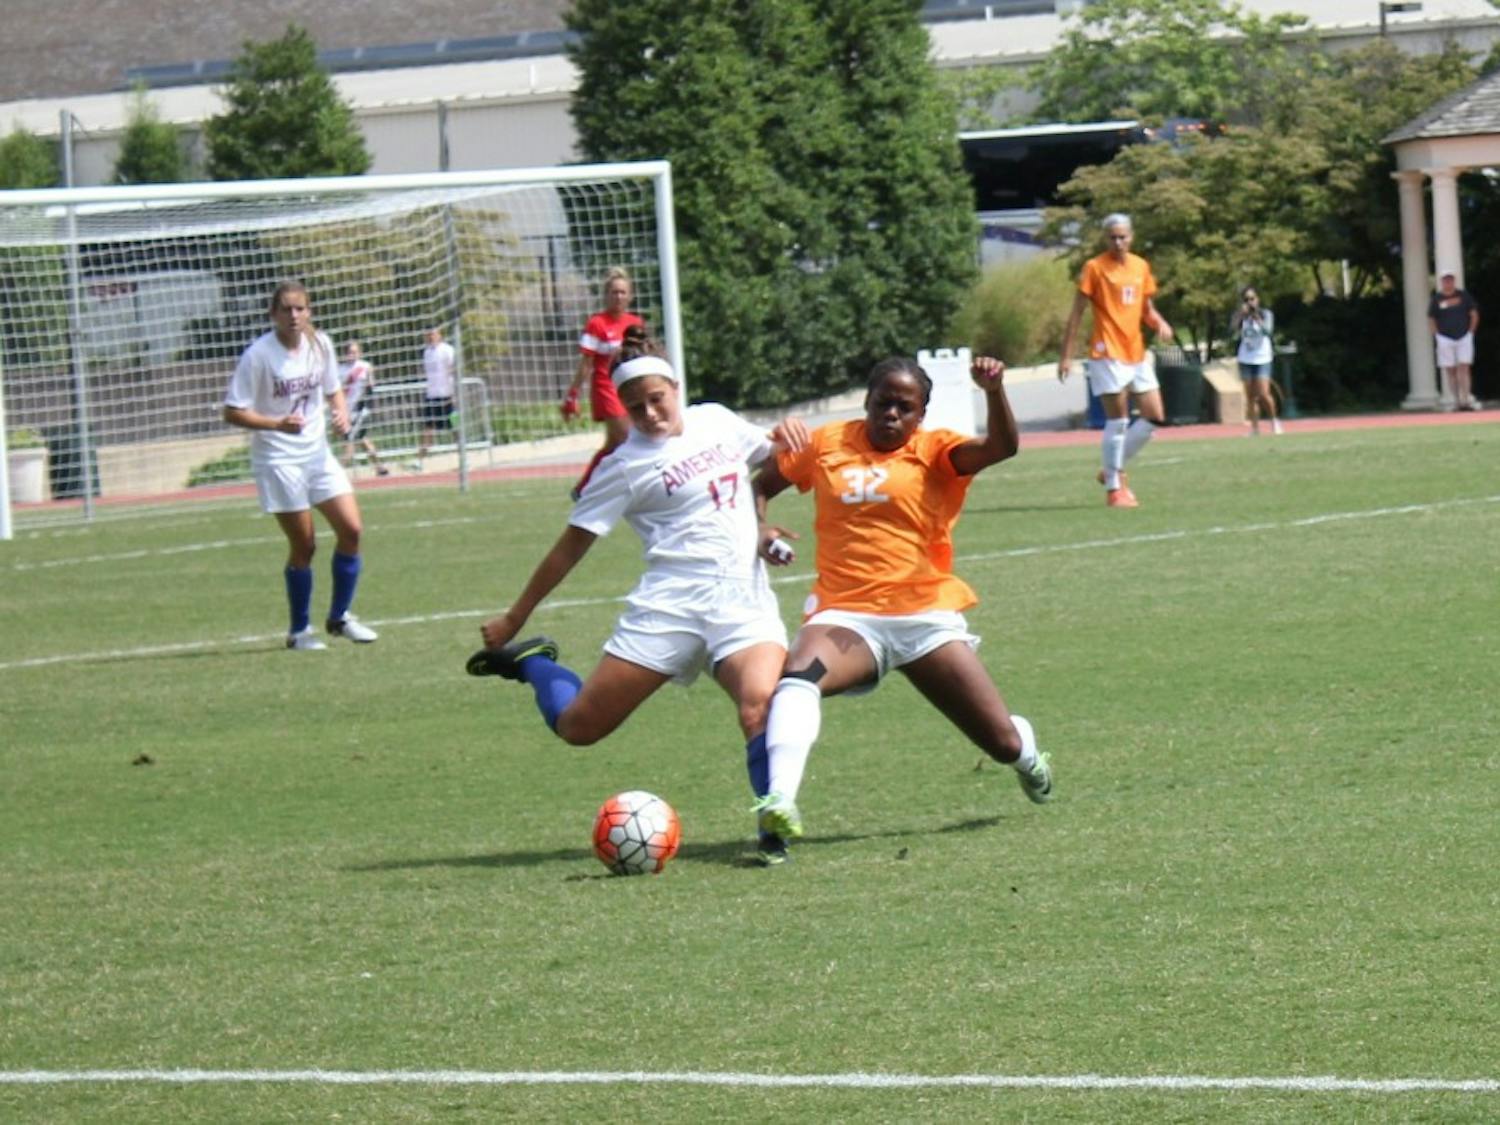 Junior forward Kaylee Hillard's clearance attempt is contested by Tennessee&nbsp;freshman Maya Neal during the Eagles 3-0 loss to the Volunteers Sunday at Reeves Field